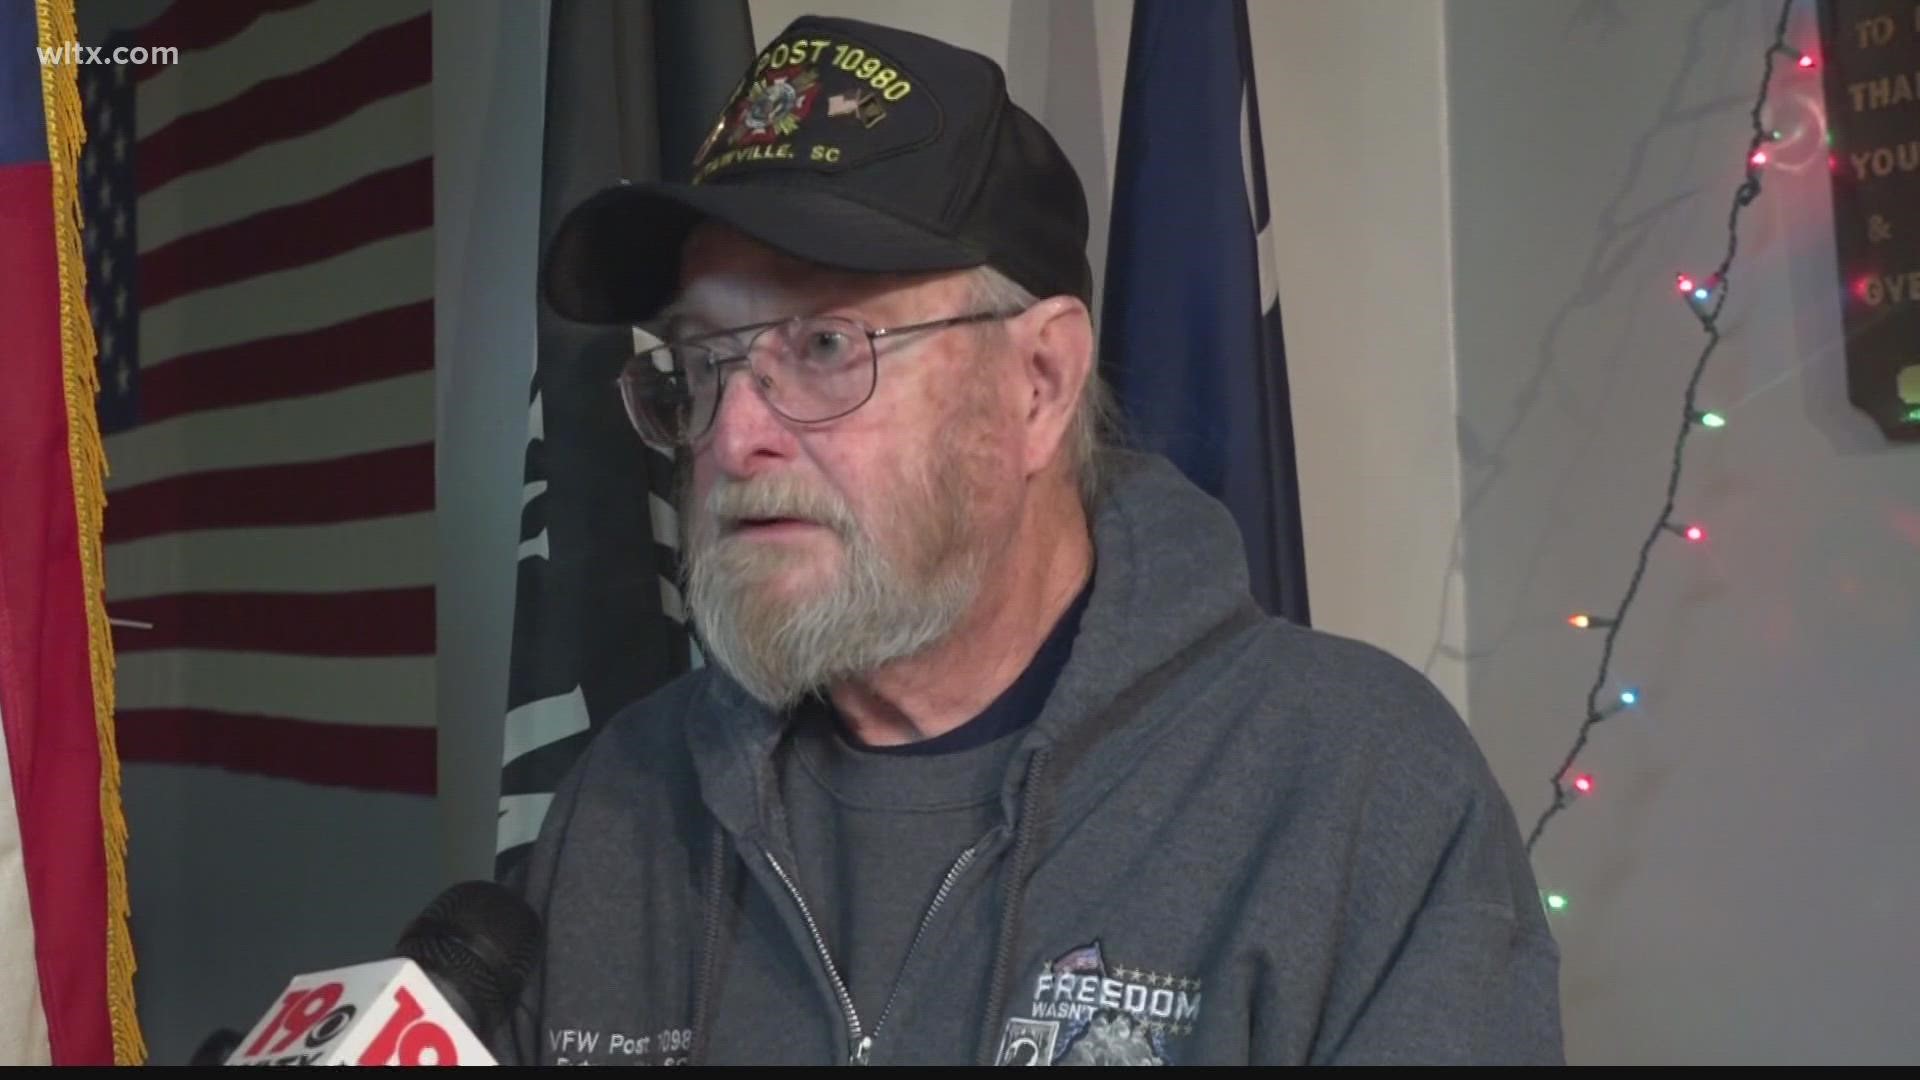 The Veterans of Foreign Wars in Eutawville serves as an outlet for local veterans and offers a helping hand as a neighbor to others.